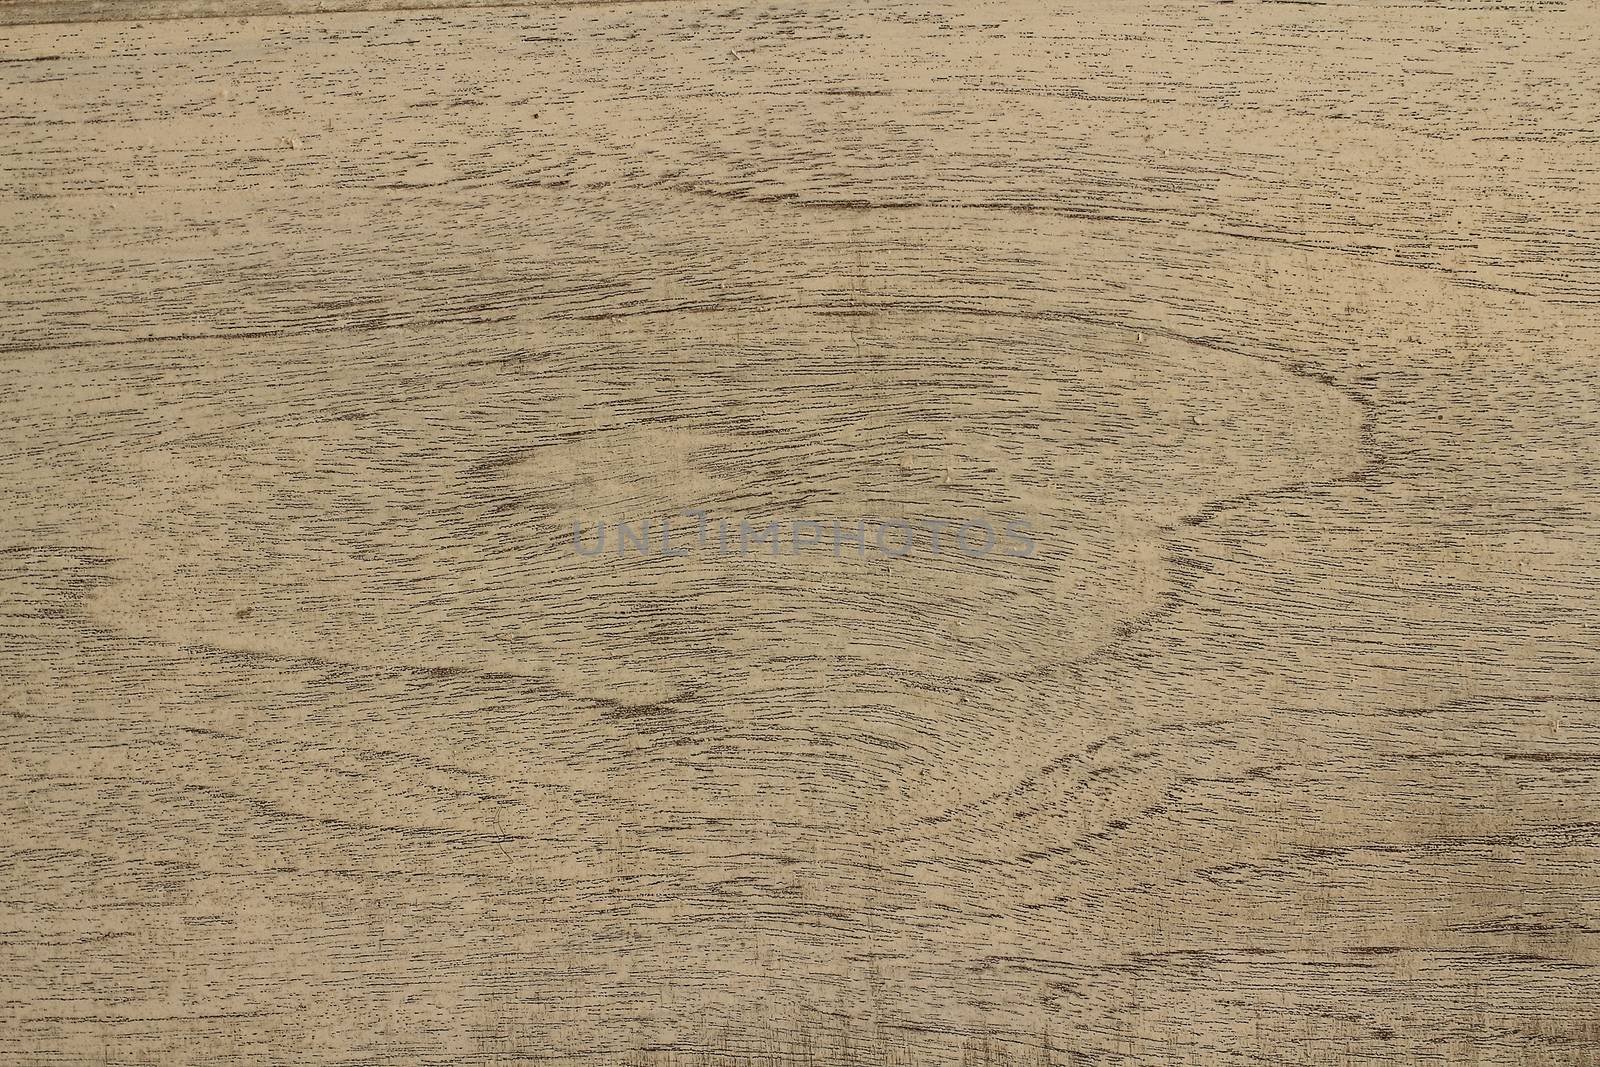 Texture of wood background closeup 